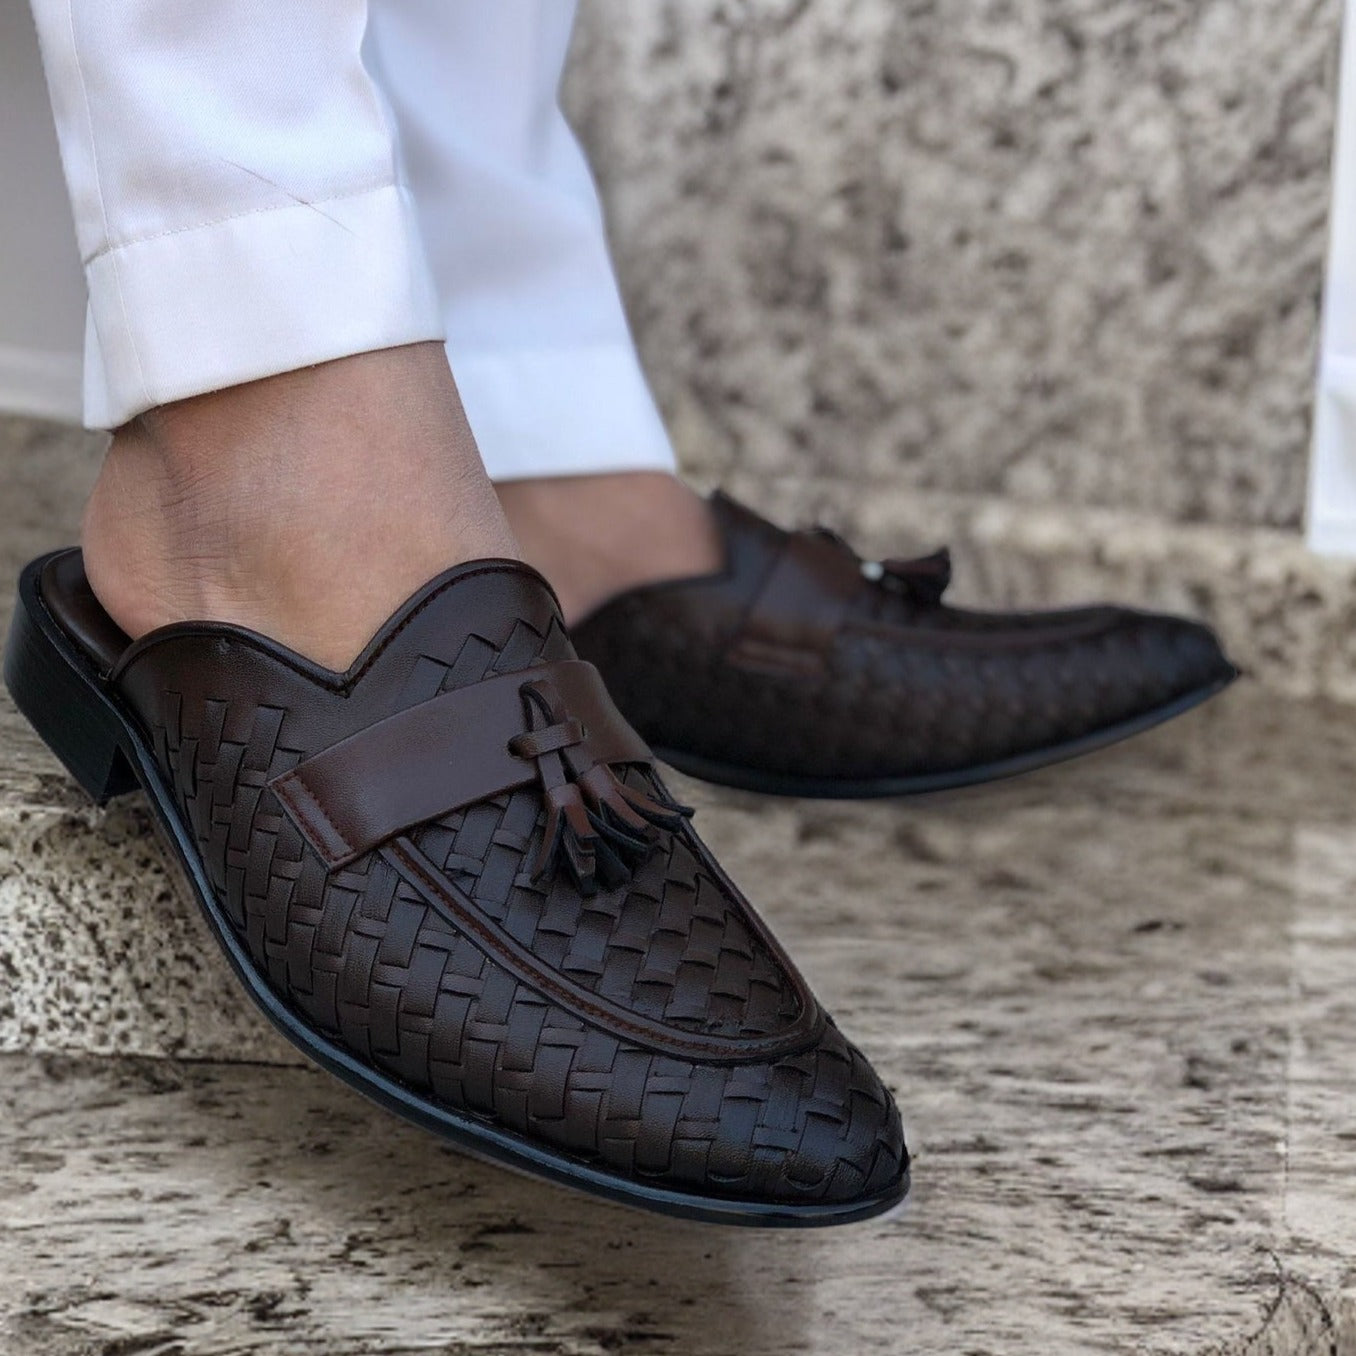 Ugur Hand Stitched Weave Backless Chappal Brown